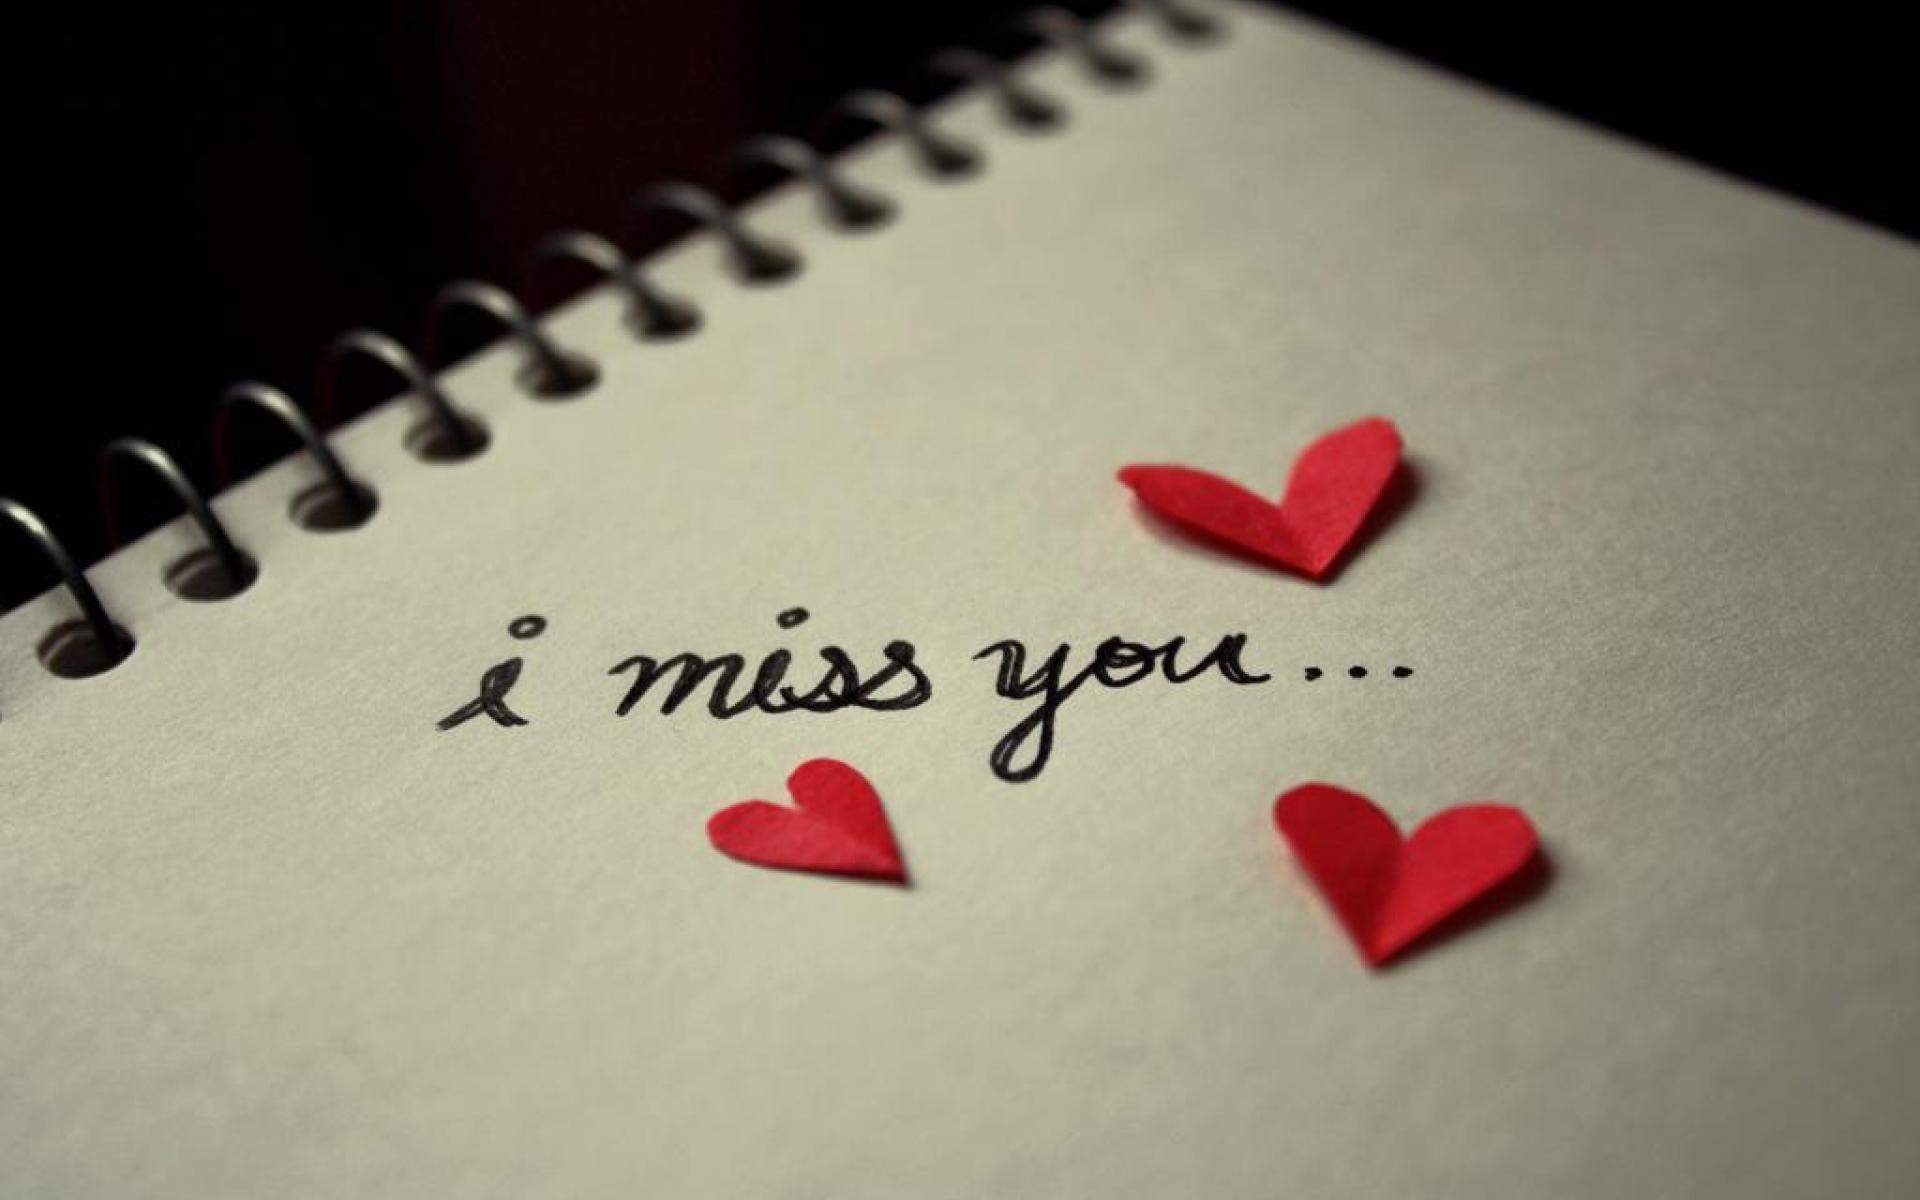 i miss you my love best wallpaper download i miss you my love best